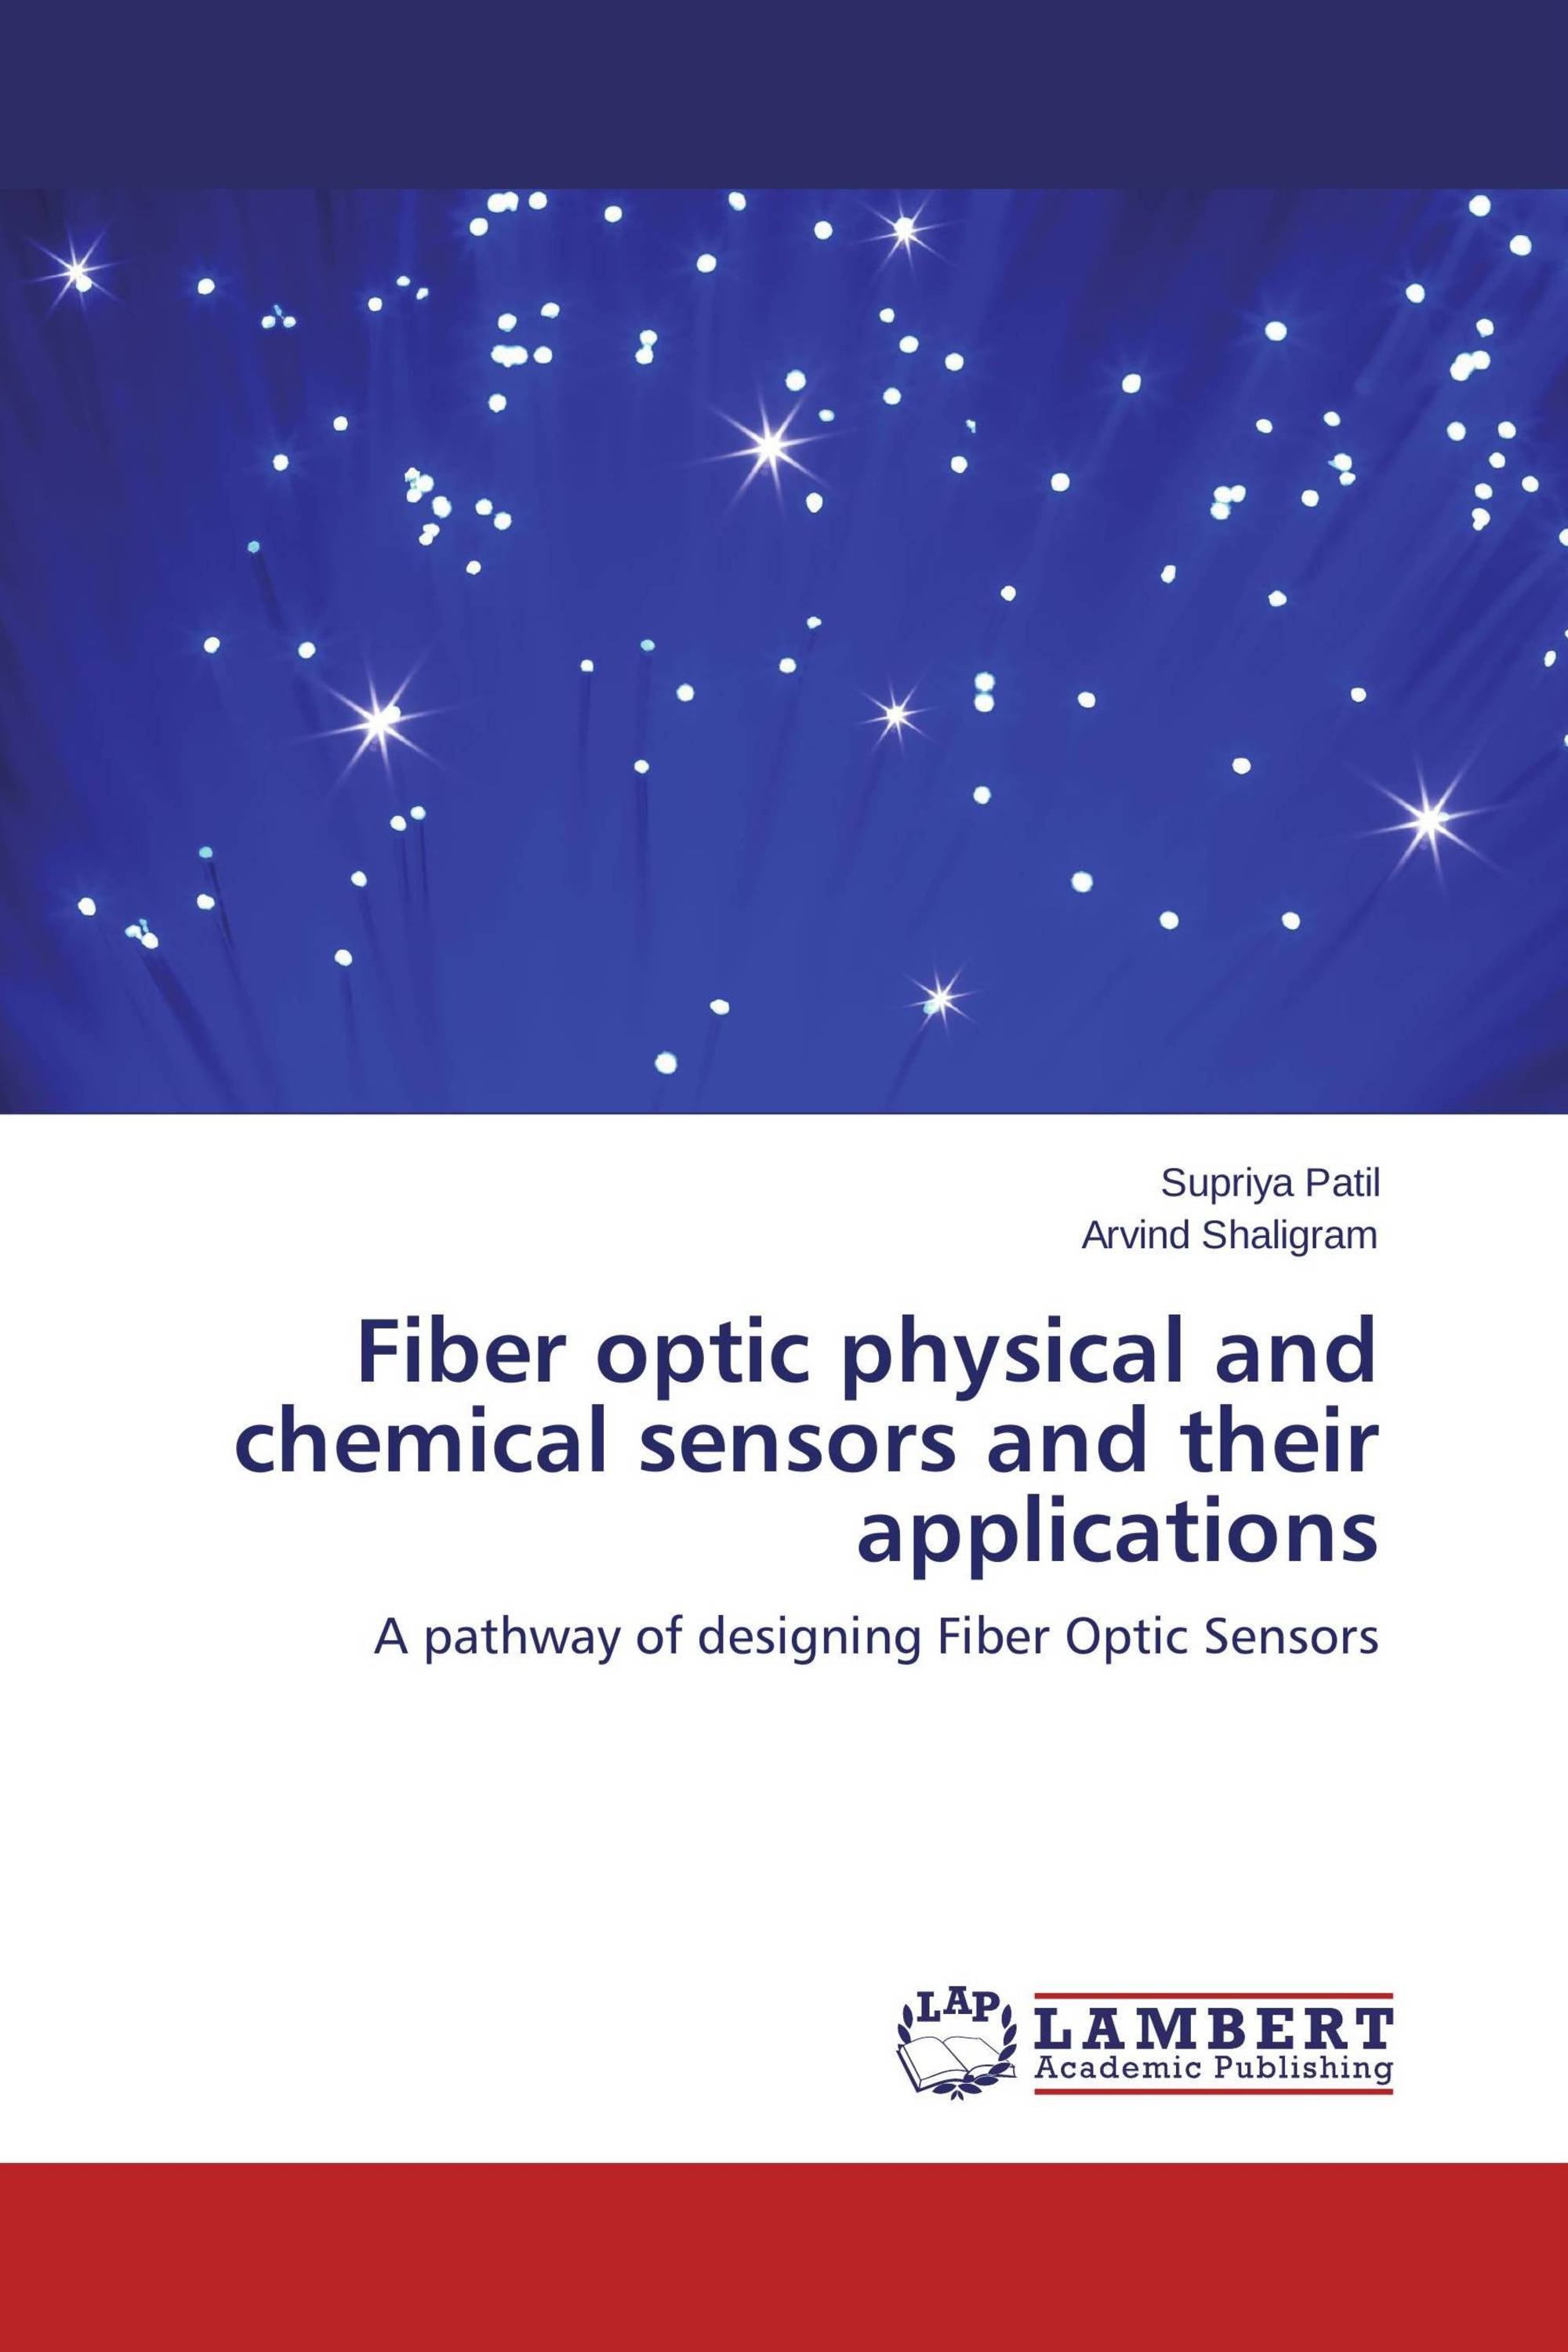 Fiber optic physical and chemical sensors and their applications